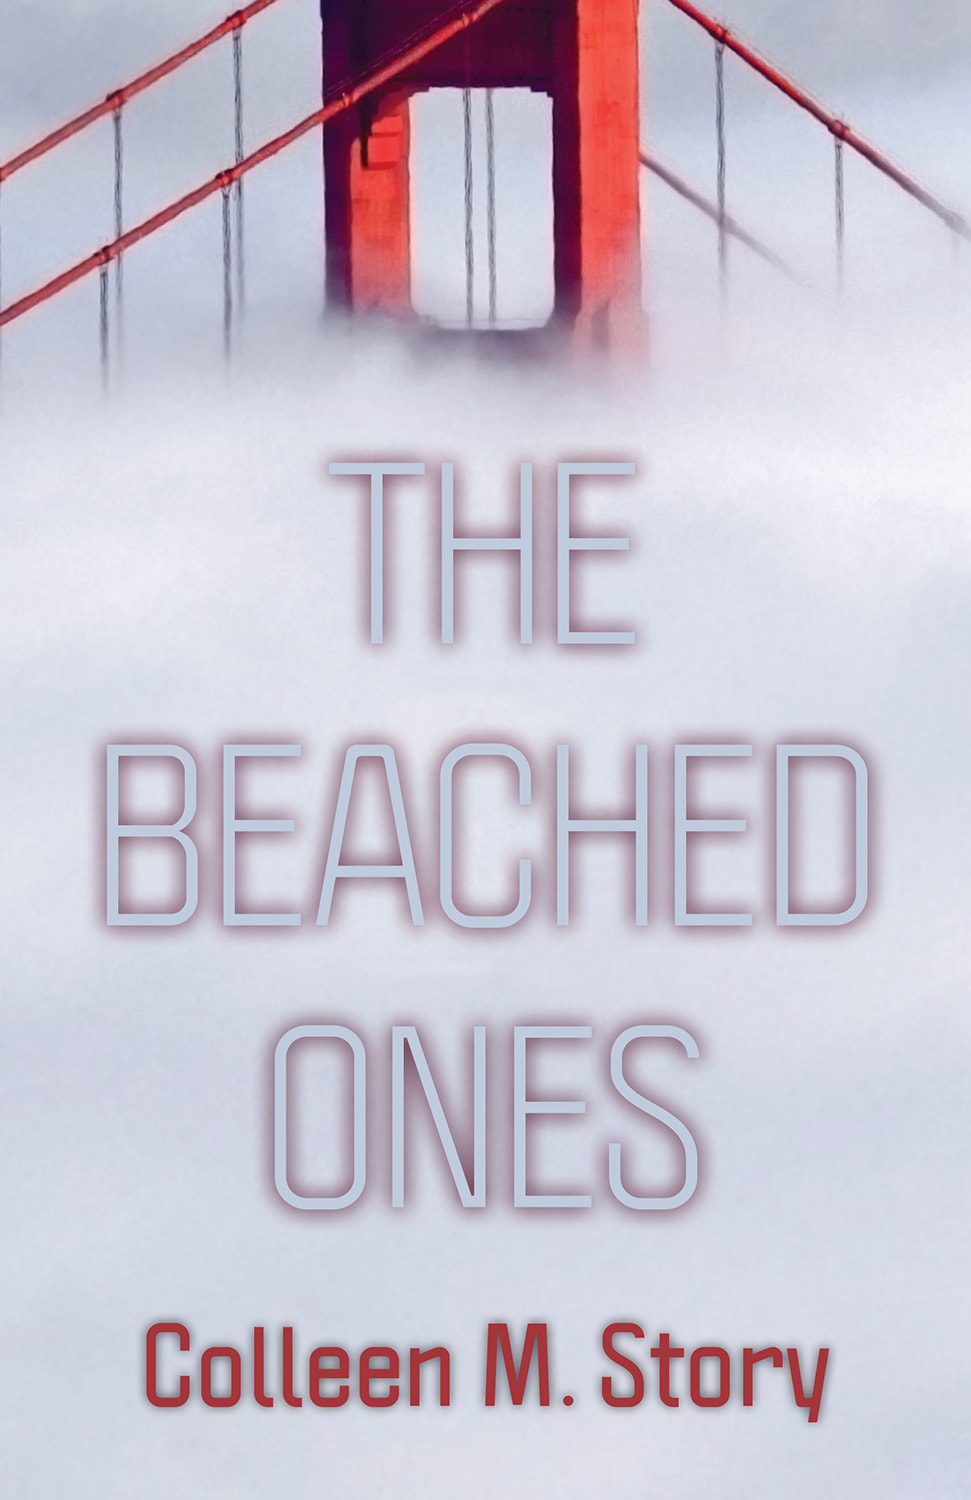 THE BEACHED ONES by Colleen Story